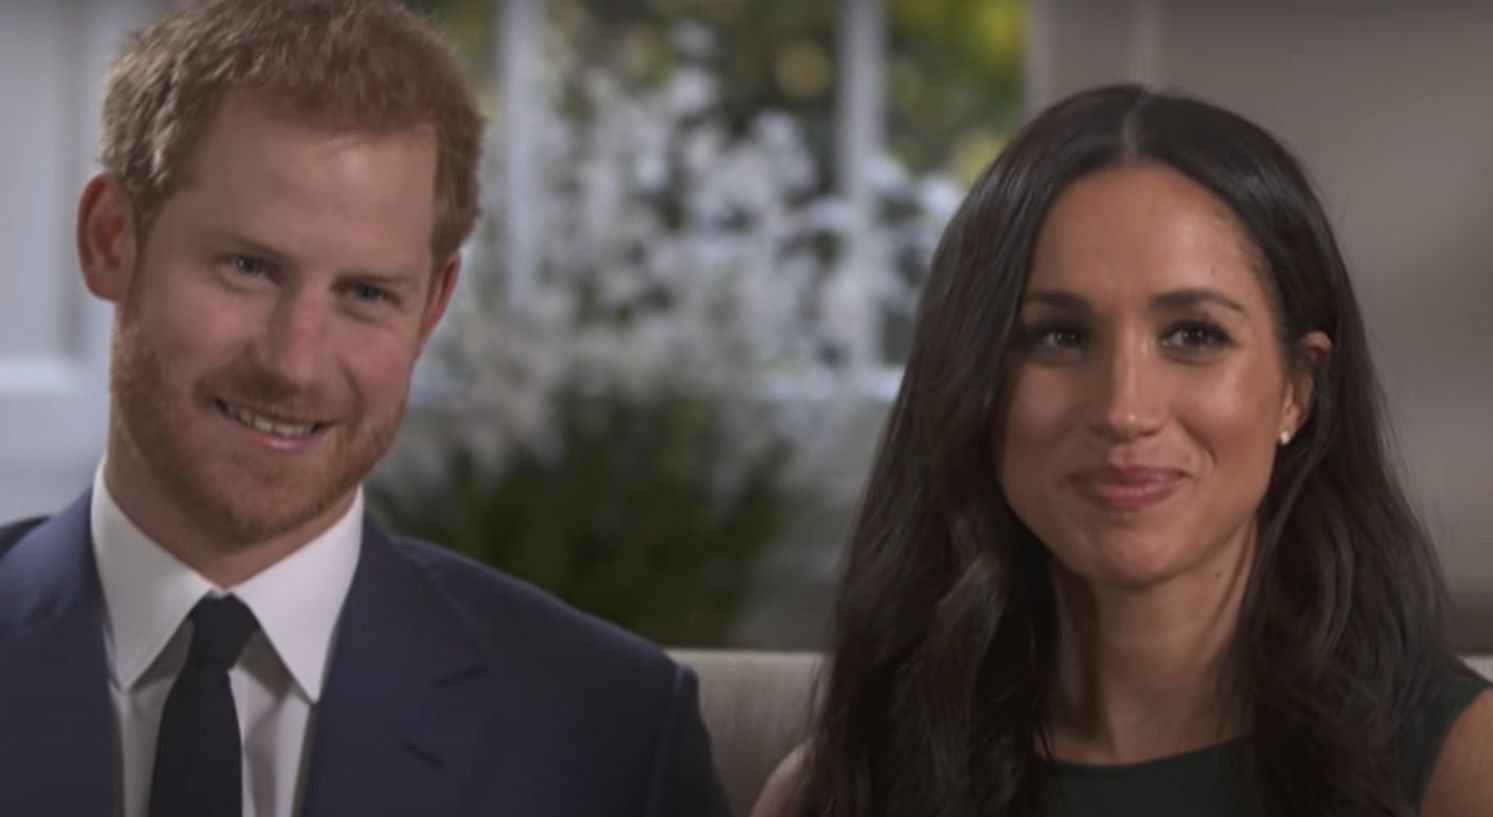 prince-harry-meghan-markle-shock-sussex-pair-reportedly-received-one-crucial-advice-from-oprah-winfrey-about-moving-on-royal-commentator-claims